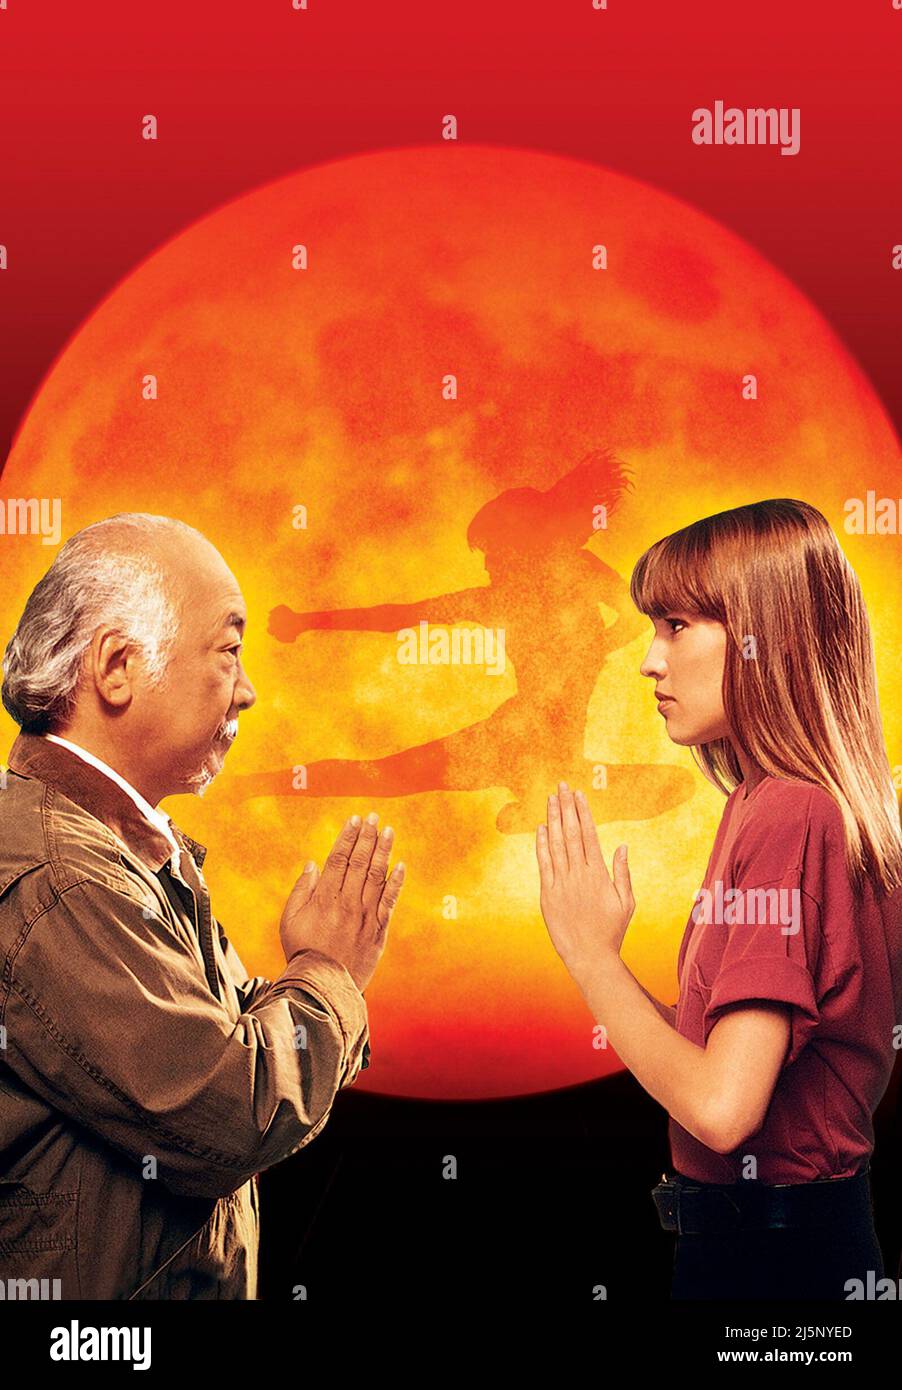 HILARY SWANK and PAT MORITA in THE NEXT KARATE KID (1994), directed by CHRISTOPHER CAIN. Credit: COLUMBIA PICTURES / Album Stock Photo